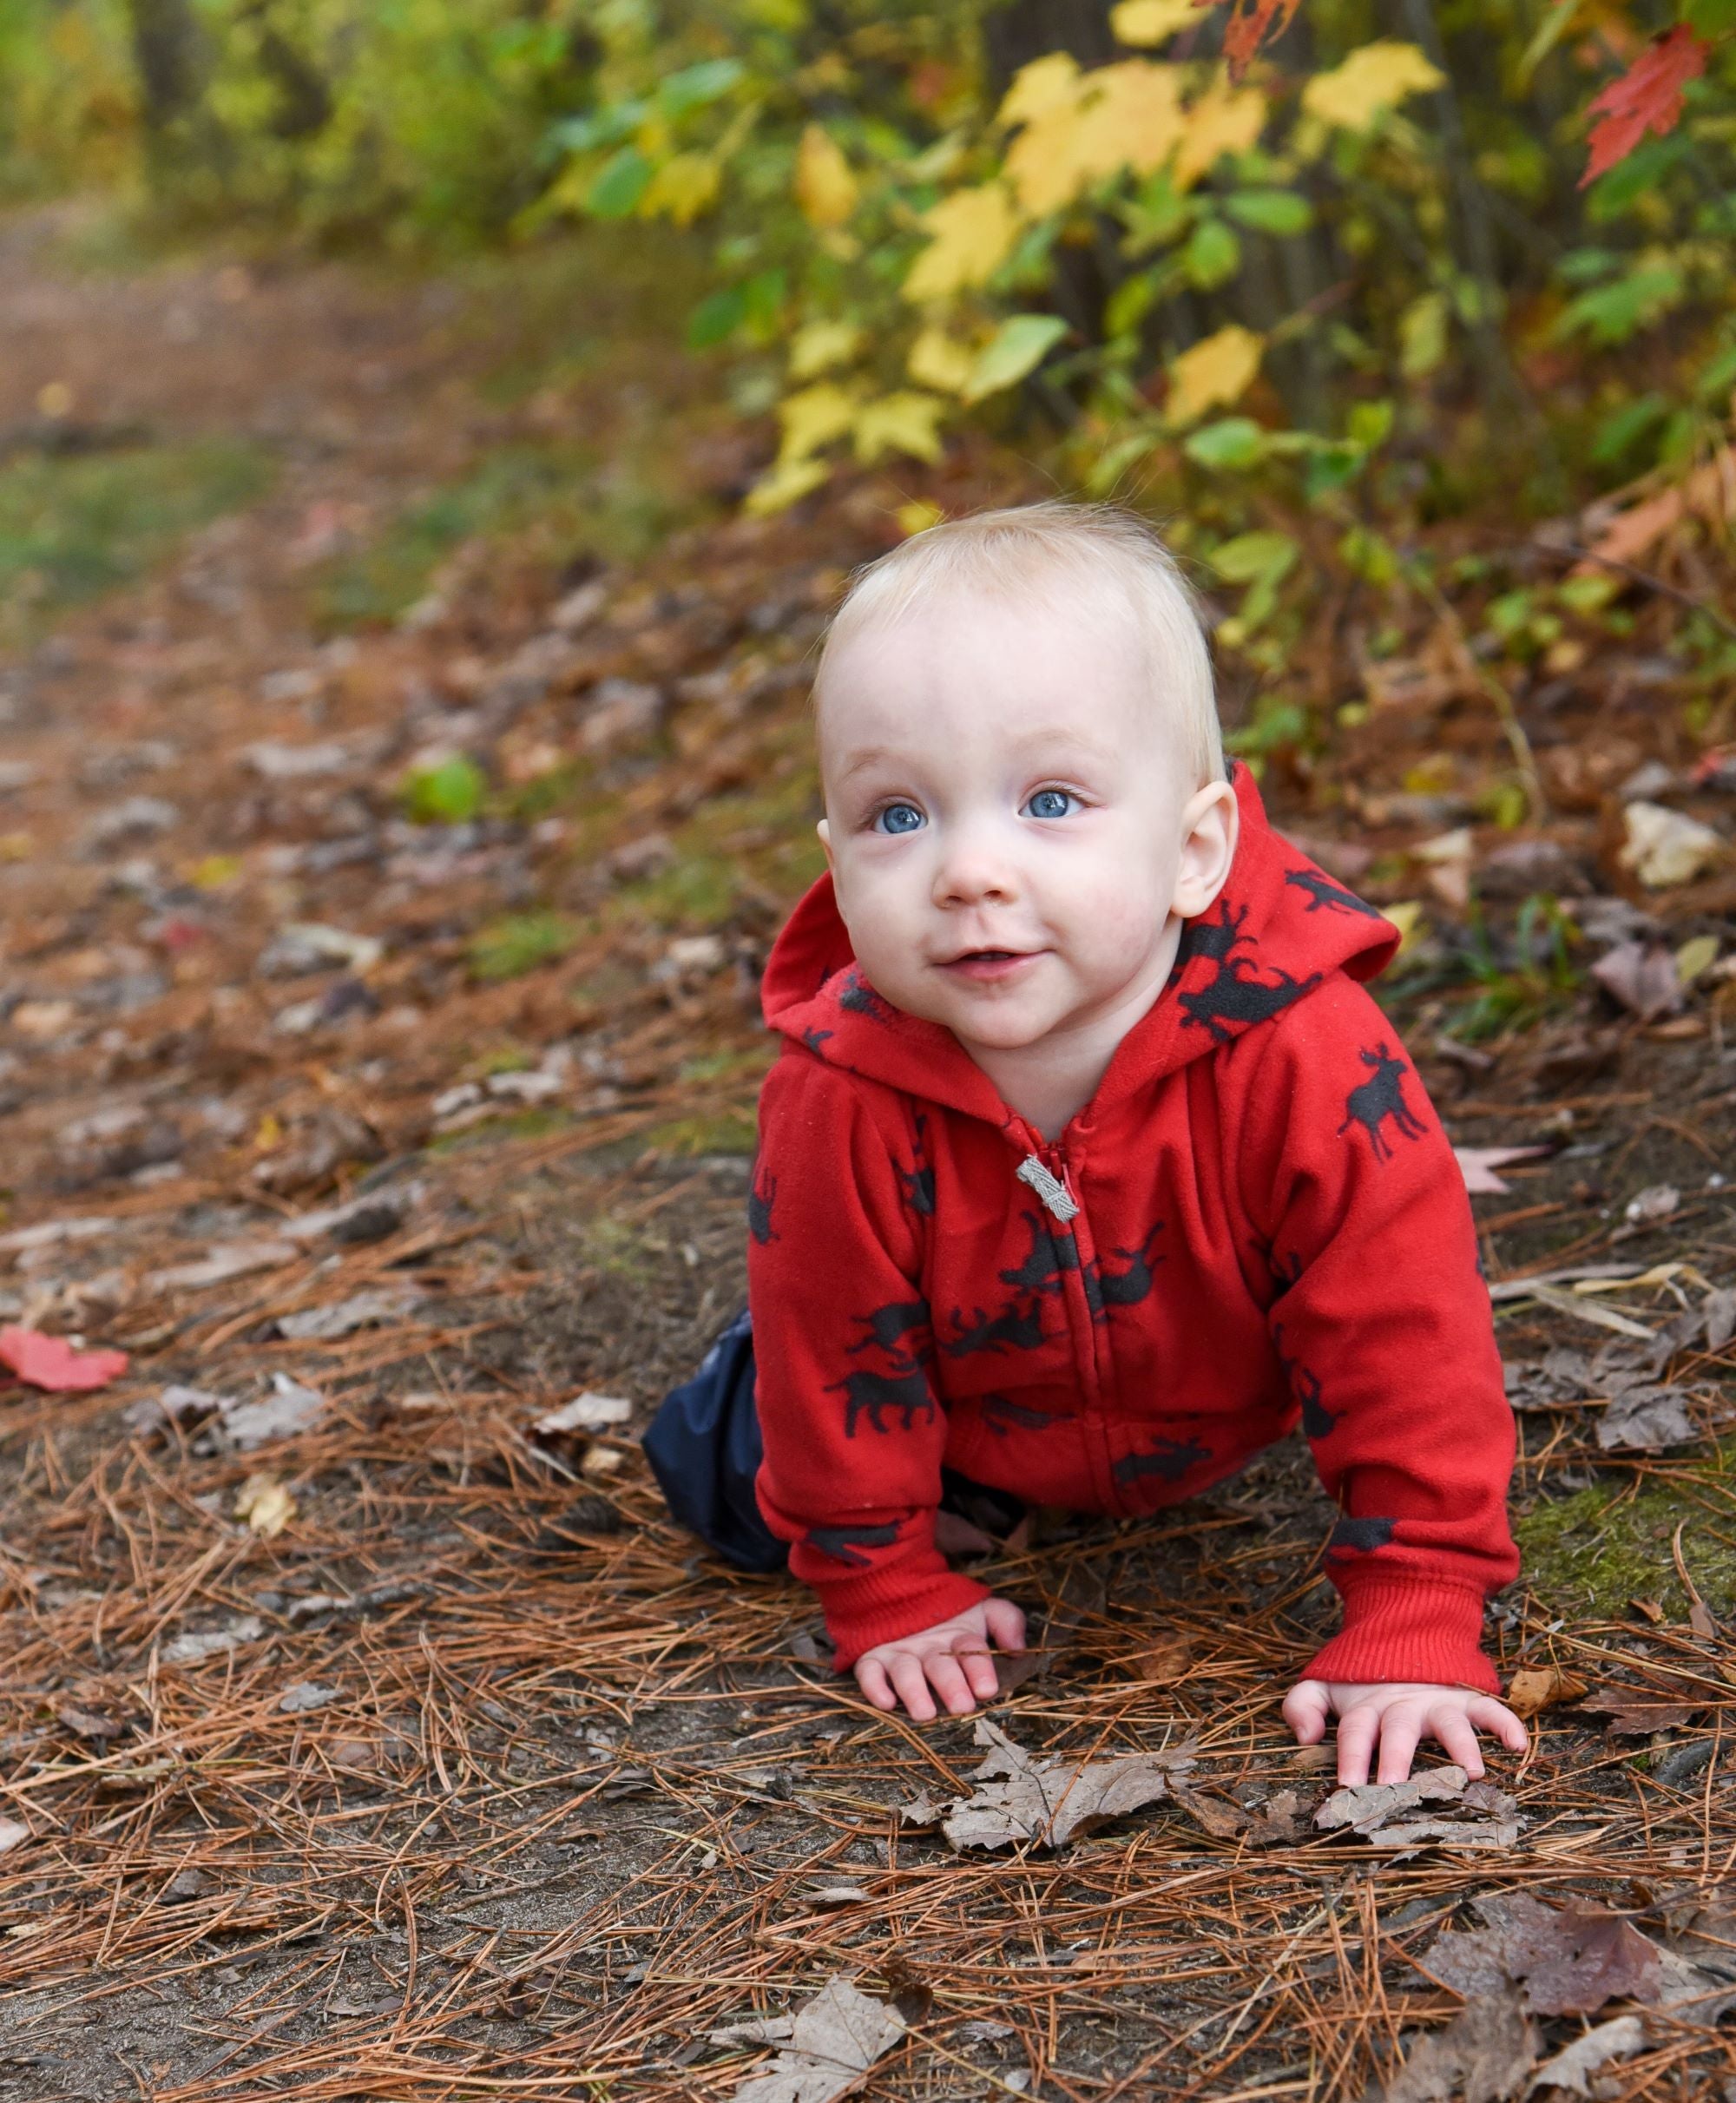 when do infants start crawling, how to help baby crawl, baby crawling